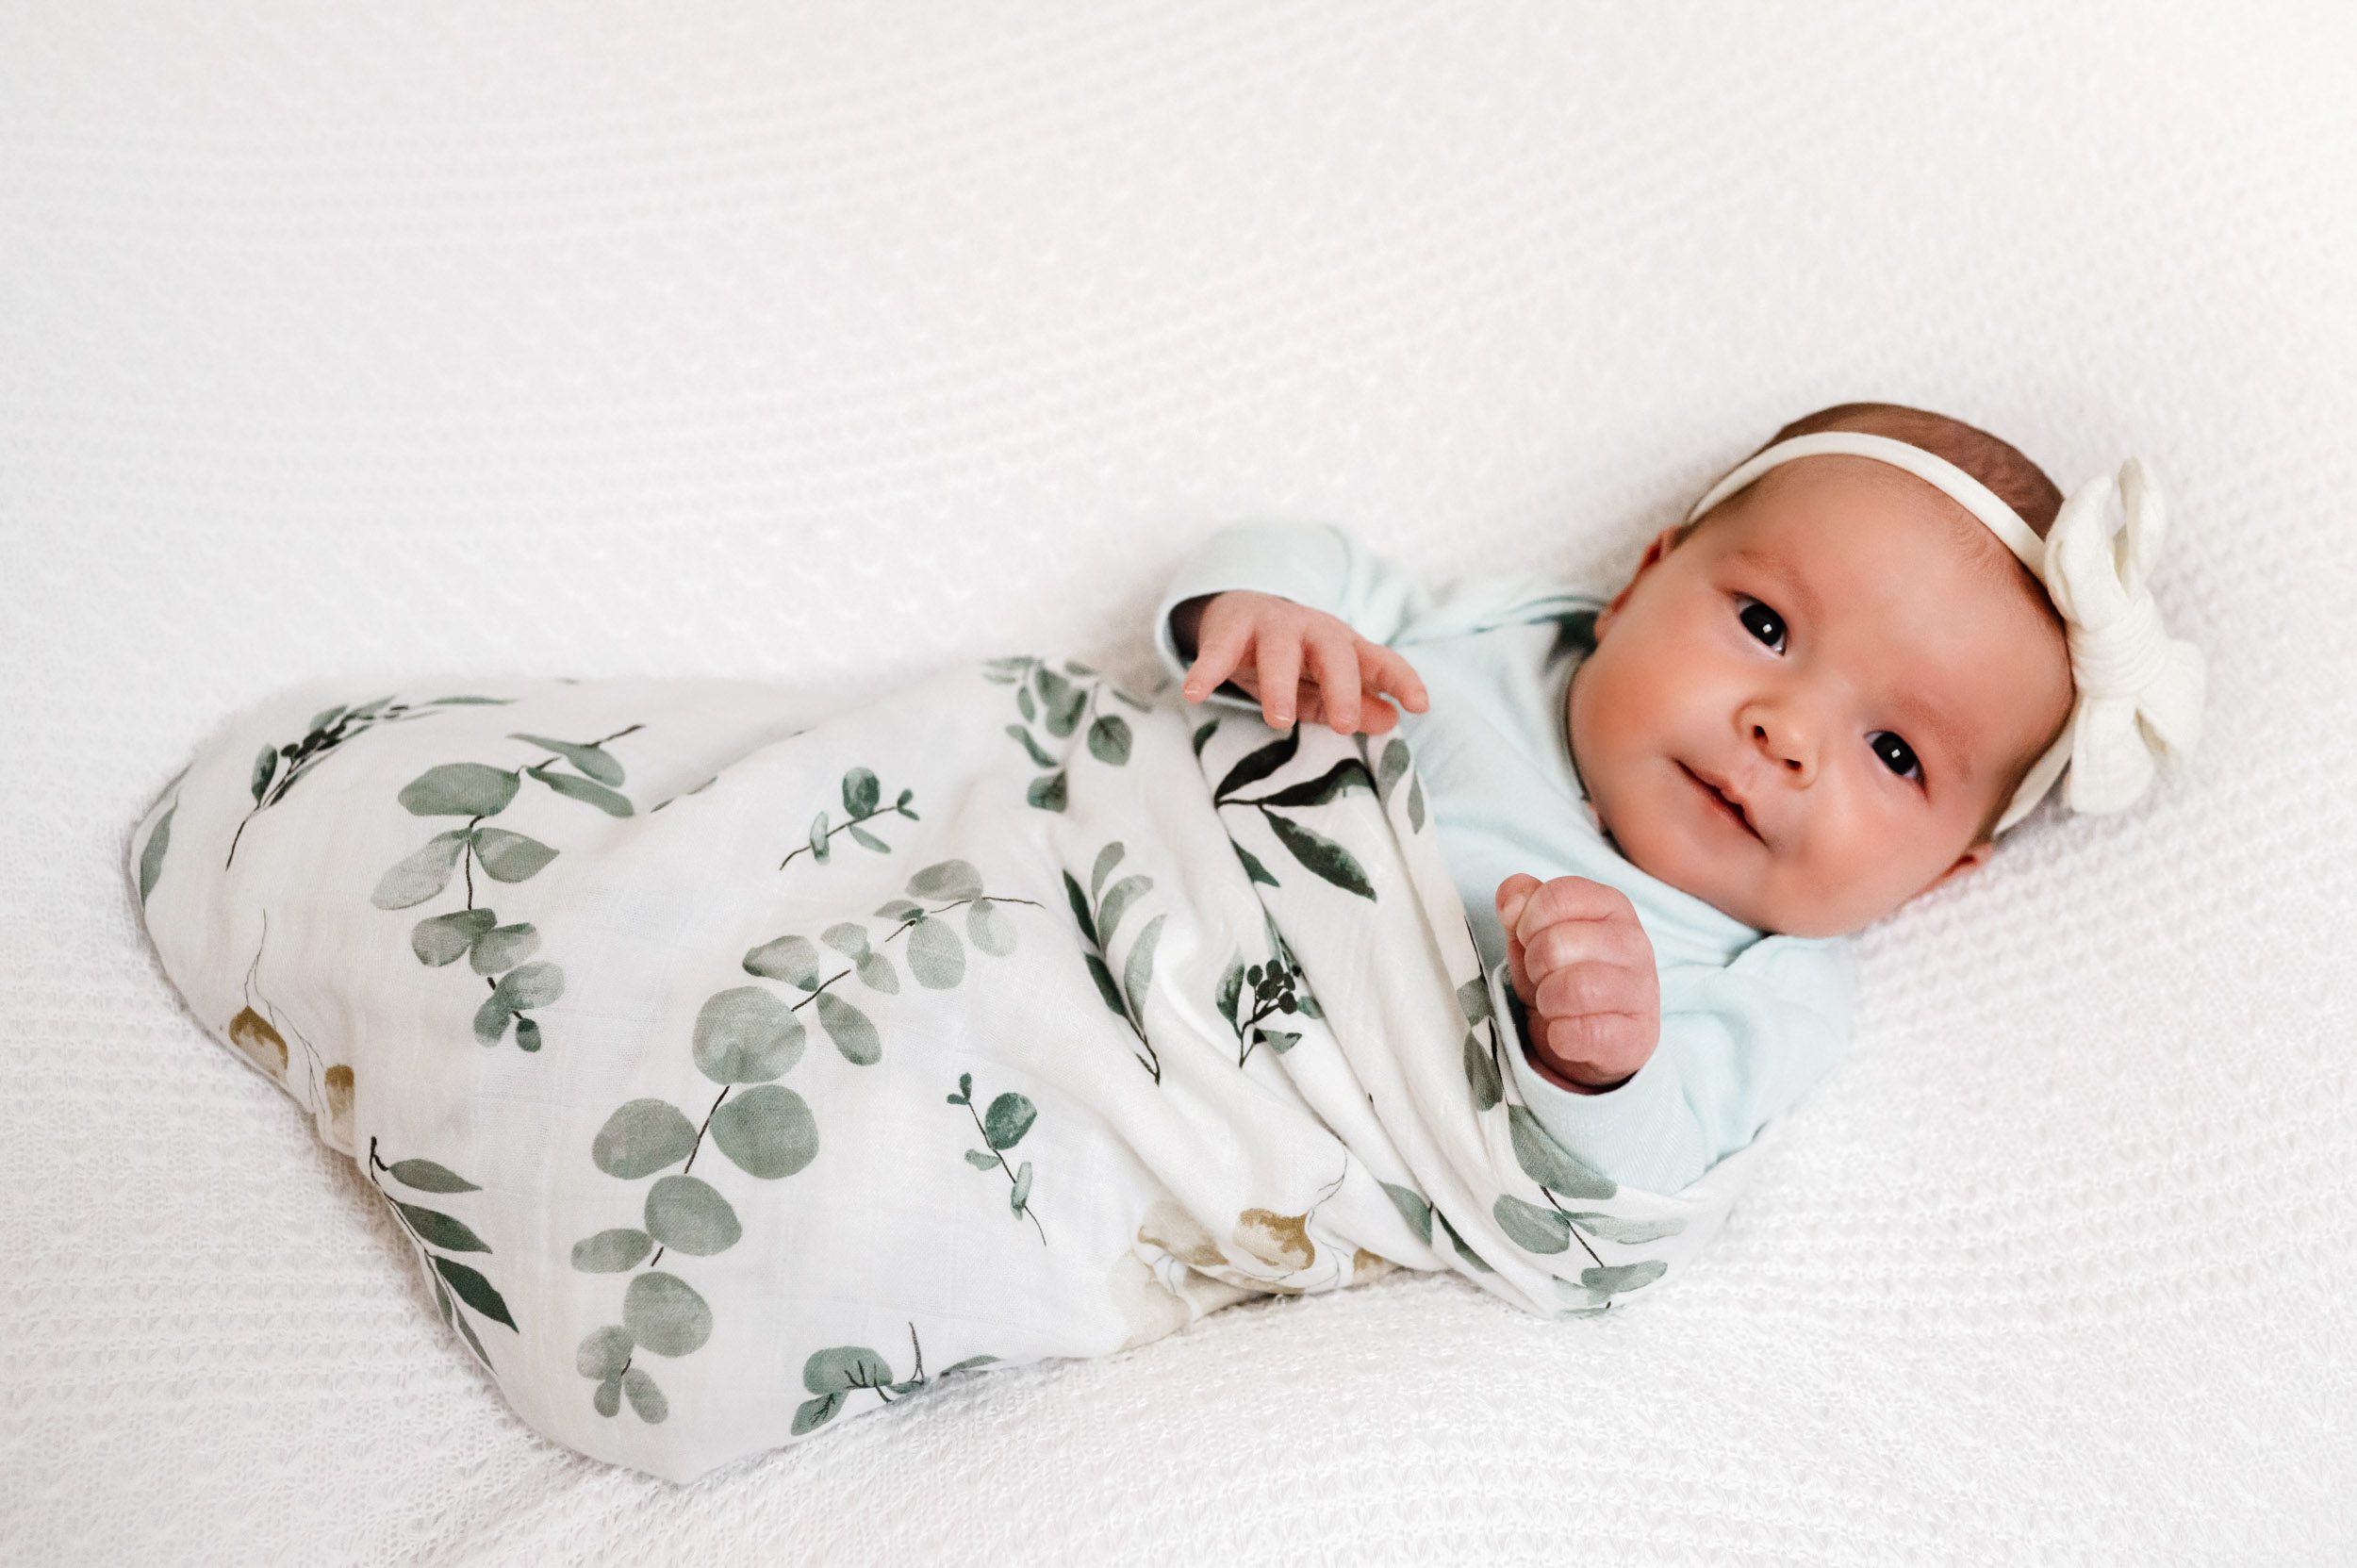 a baby girl in floral swaddle blanket laying on a white textured backdrop looking directly at the camera with a hint of a smile on her face during a newborn photoshoot